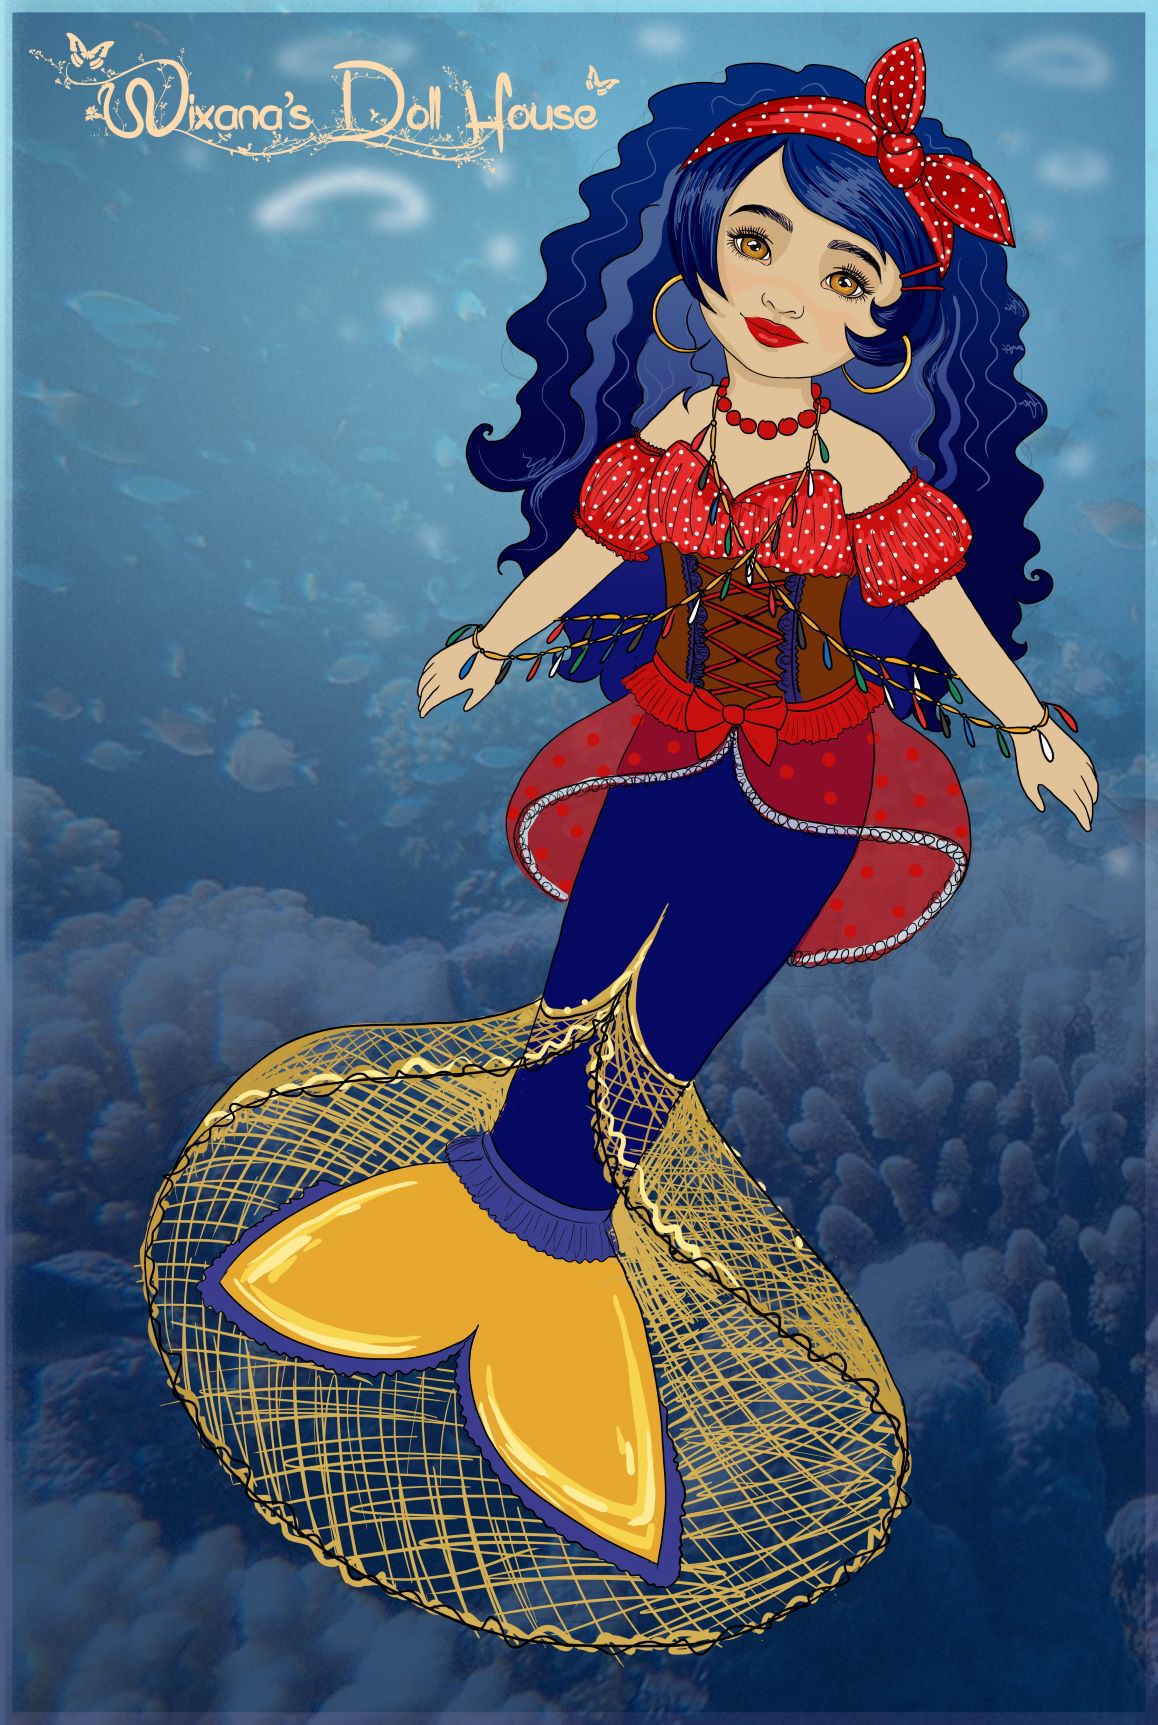 Mermaid Design from Wixana's Doll House